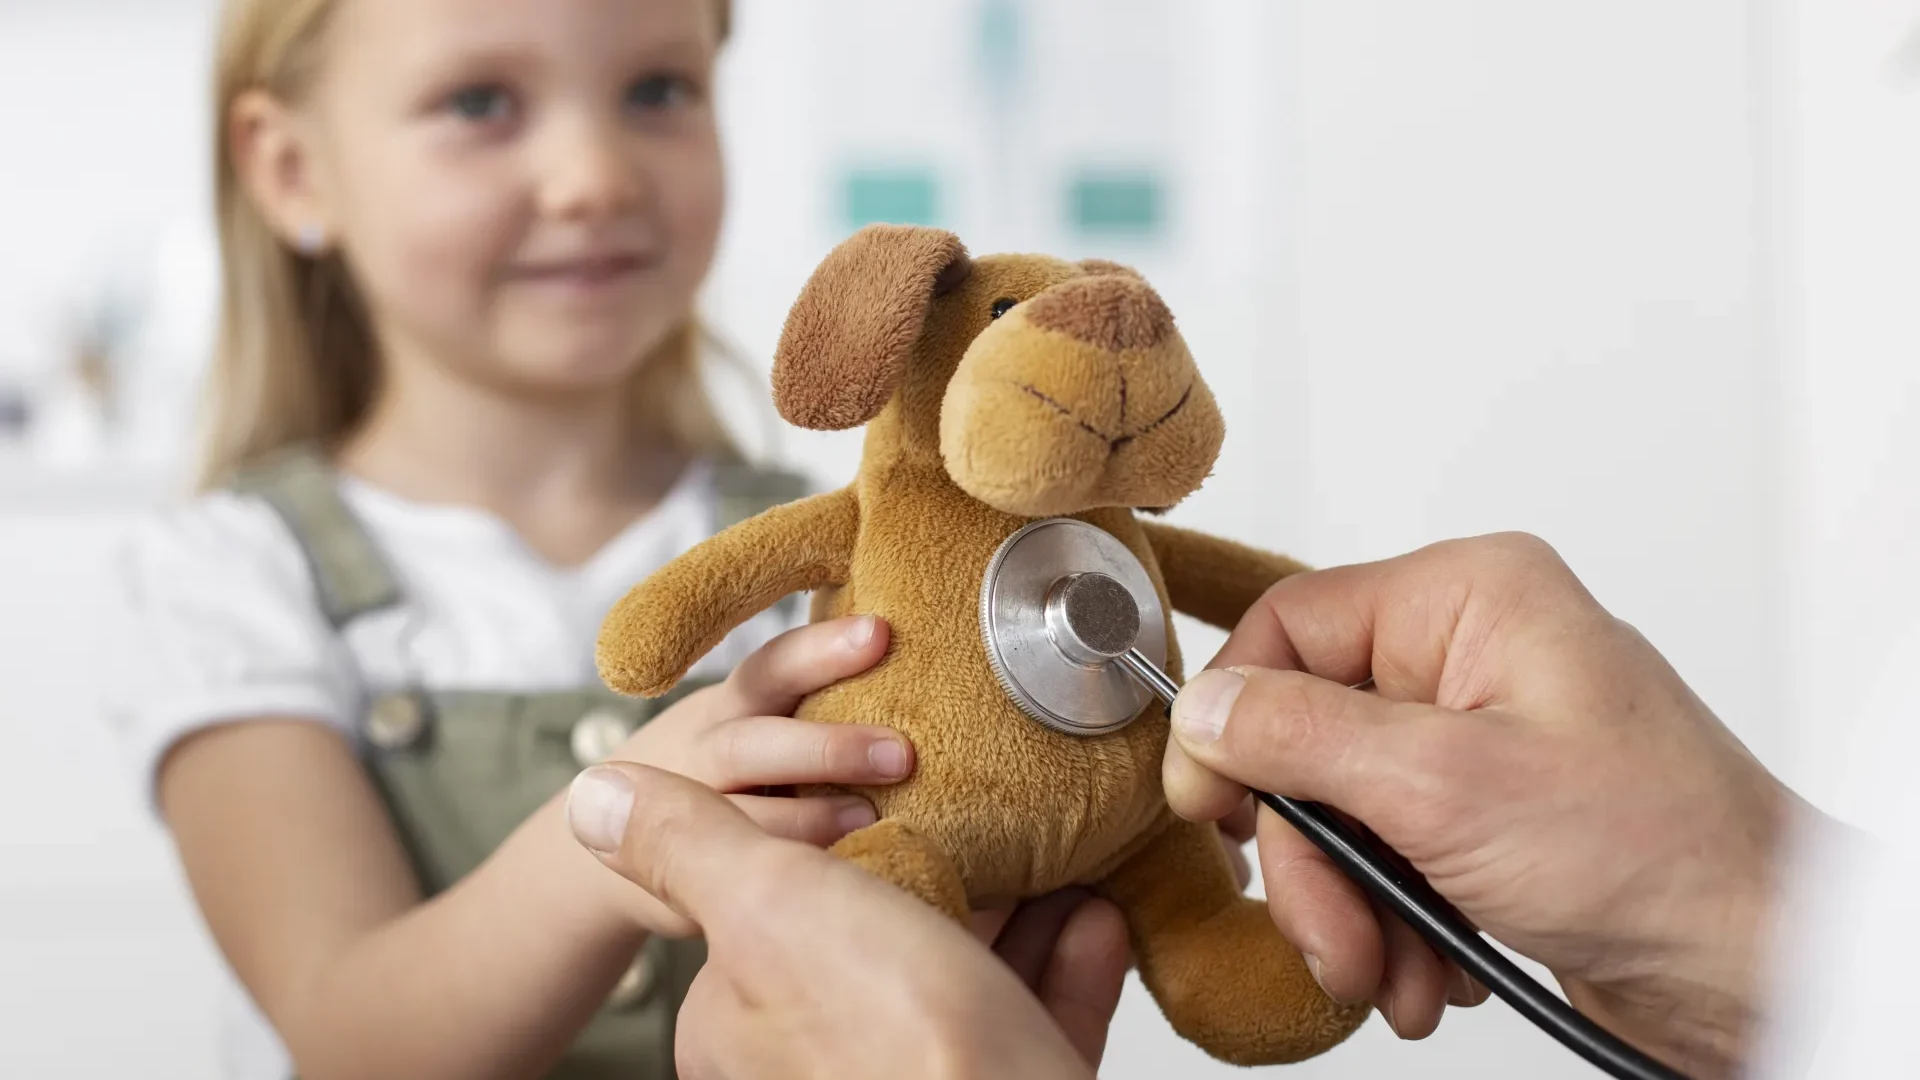 young girl at pediatrician doctor osculte soft toy